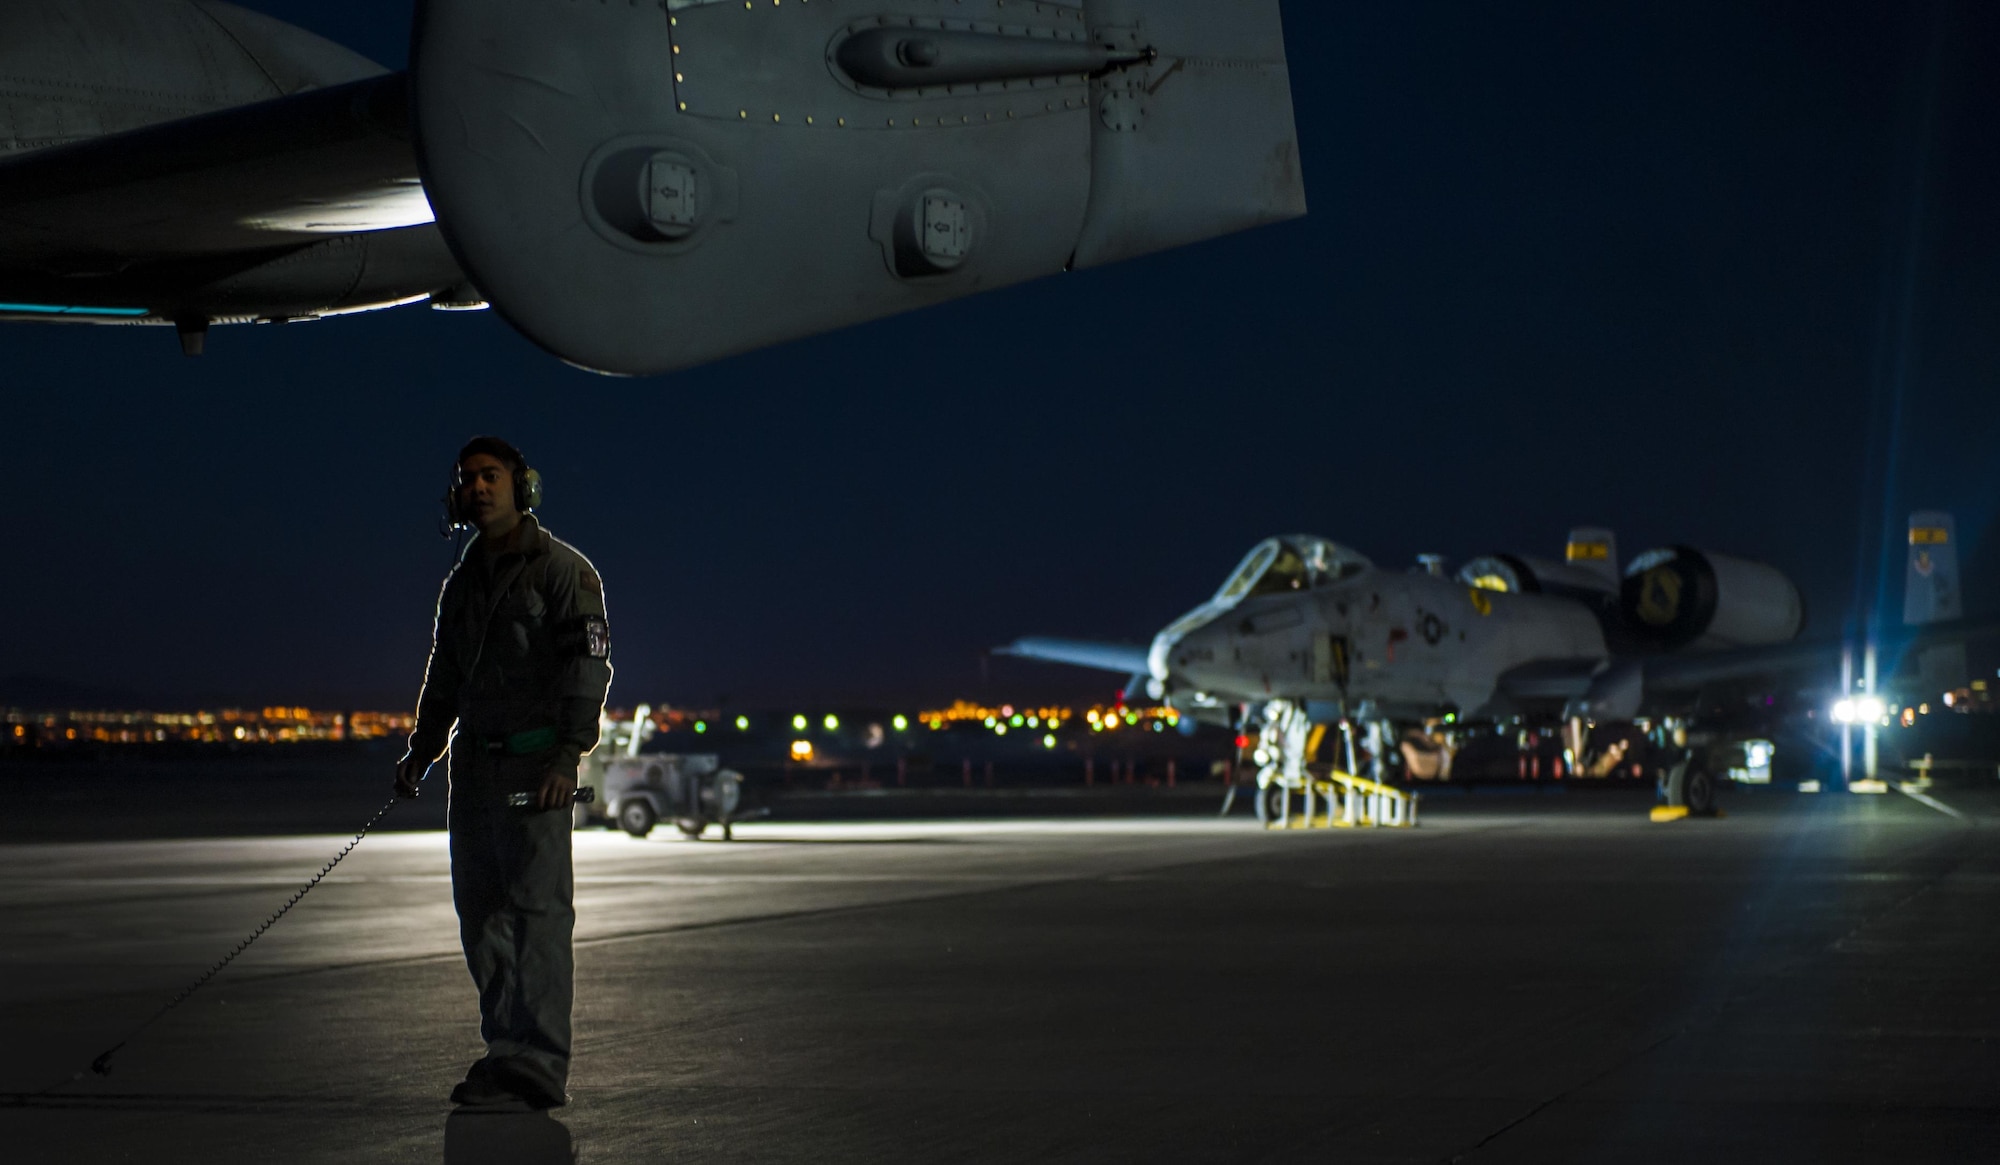 Senior Airman Scott Martinez, 355th Aircraft Maintenance Squadron crew chief, Davis-Monthan Air Force Base, Ariz., performs pre-flight checks to make sure the tail rudders of an A-10 Thunderbolt operate properly before takeoff at Nellis Air Force Base, Nev., Oct. 4, 2016. The Thunderbolt II can employ a wide variety of conventional munitions, including general purpose bombs, cluster bomb units, laser guided bombs, and joint direct attack munitions. (U.S. Air Force photo by Airman 1st Class Kevin Tanenbaum/Released)